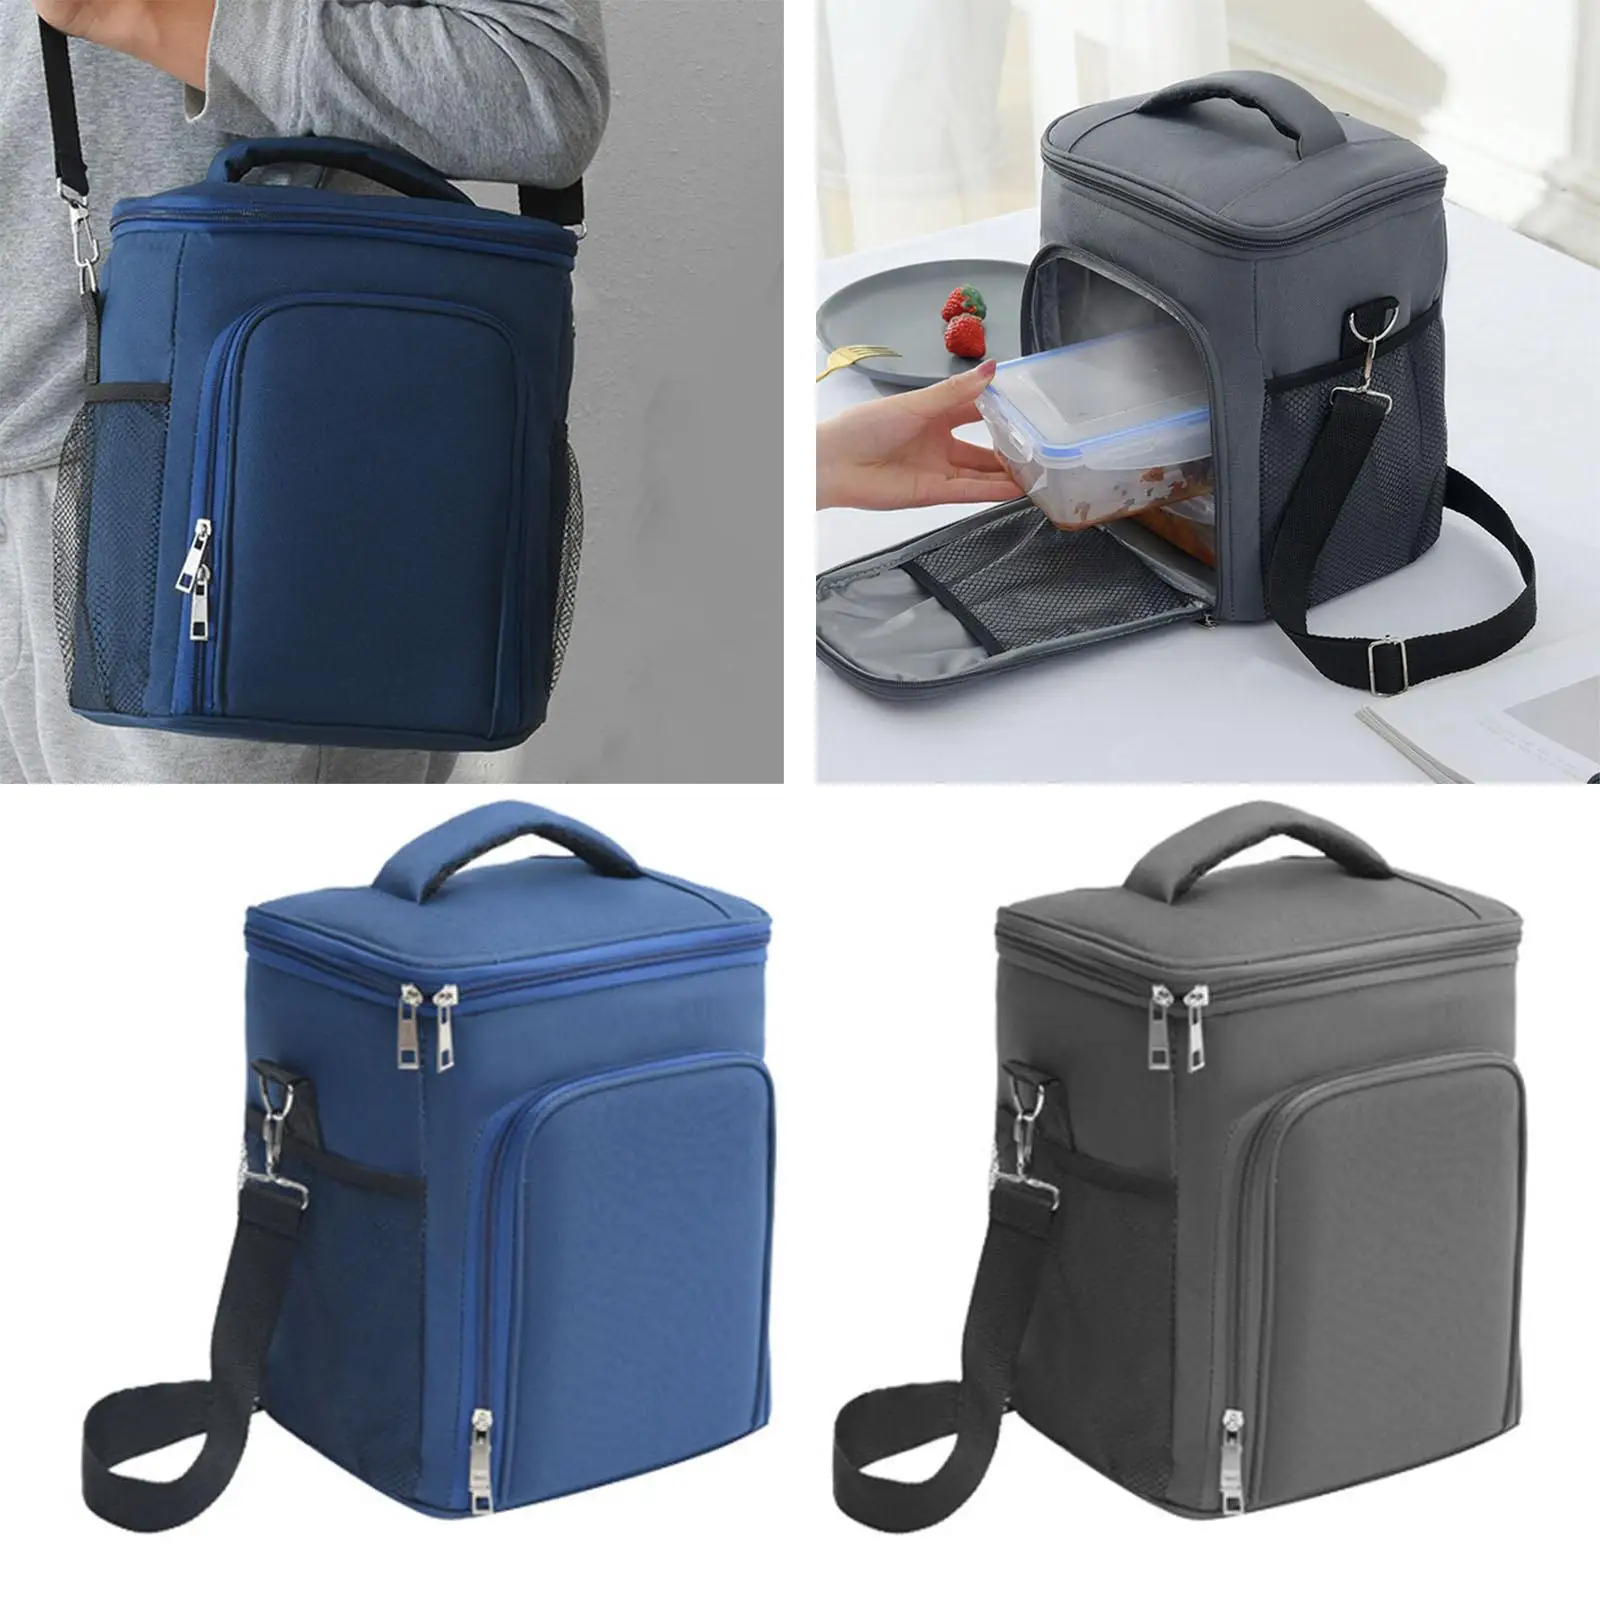 Cooler Backpack Leakproof Oxford Cloth with Pockets Cooler Bag for Outdoor Work Camping